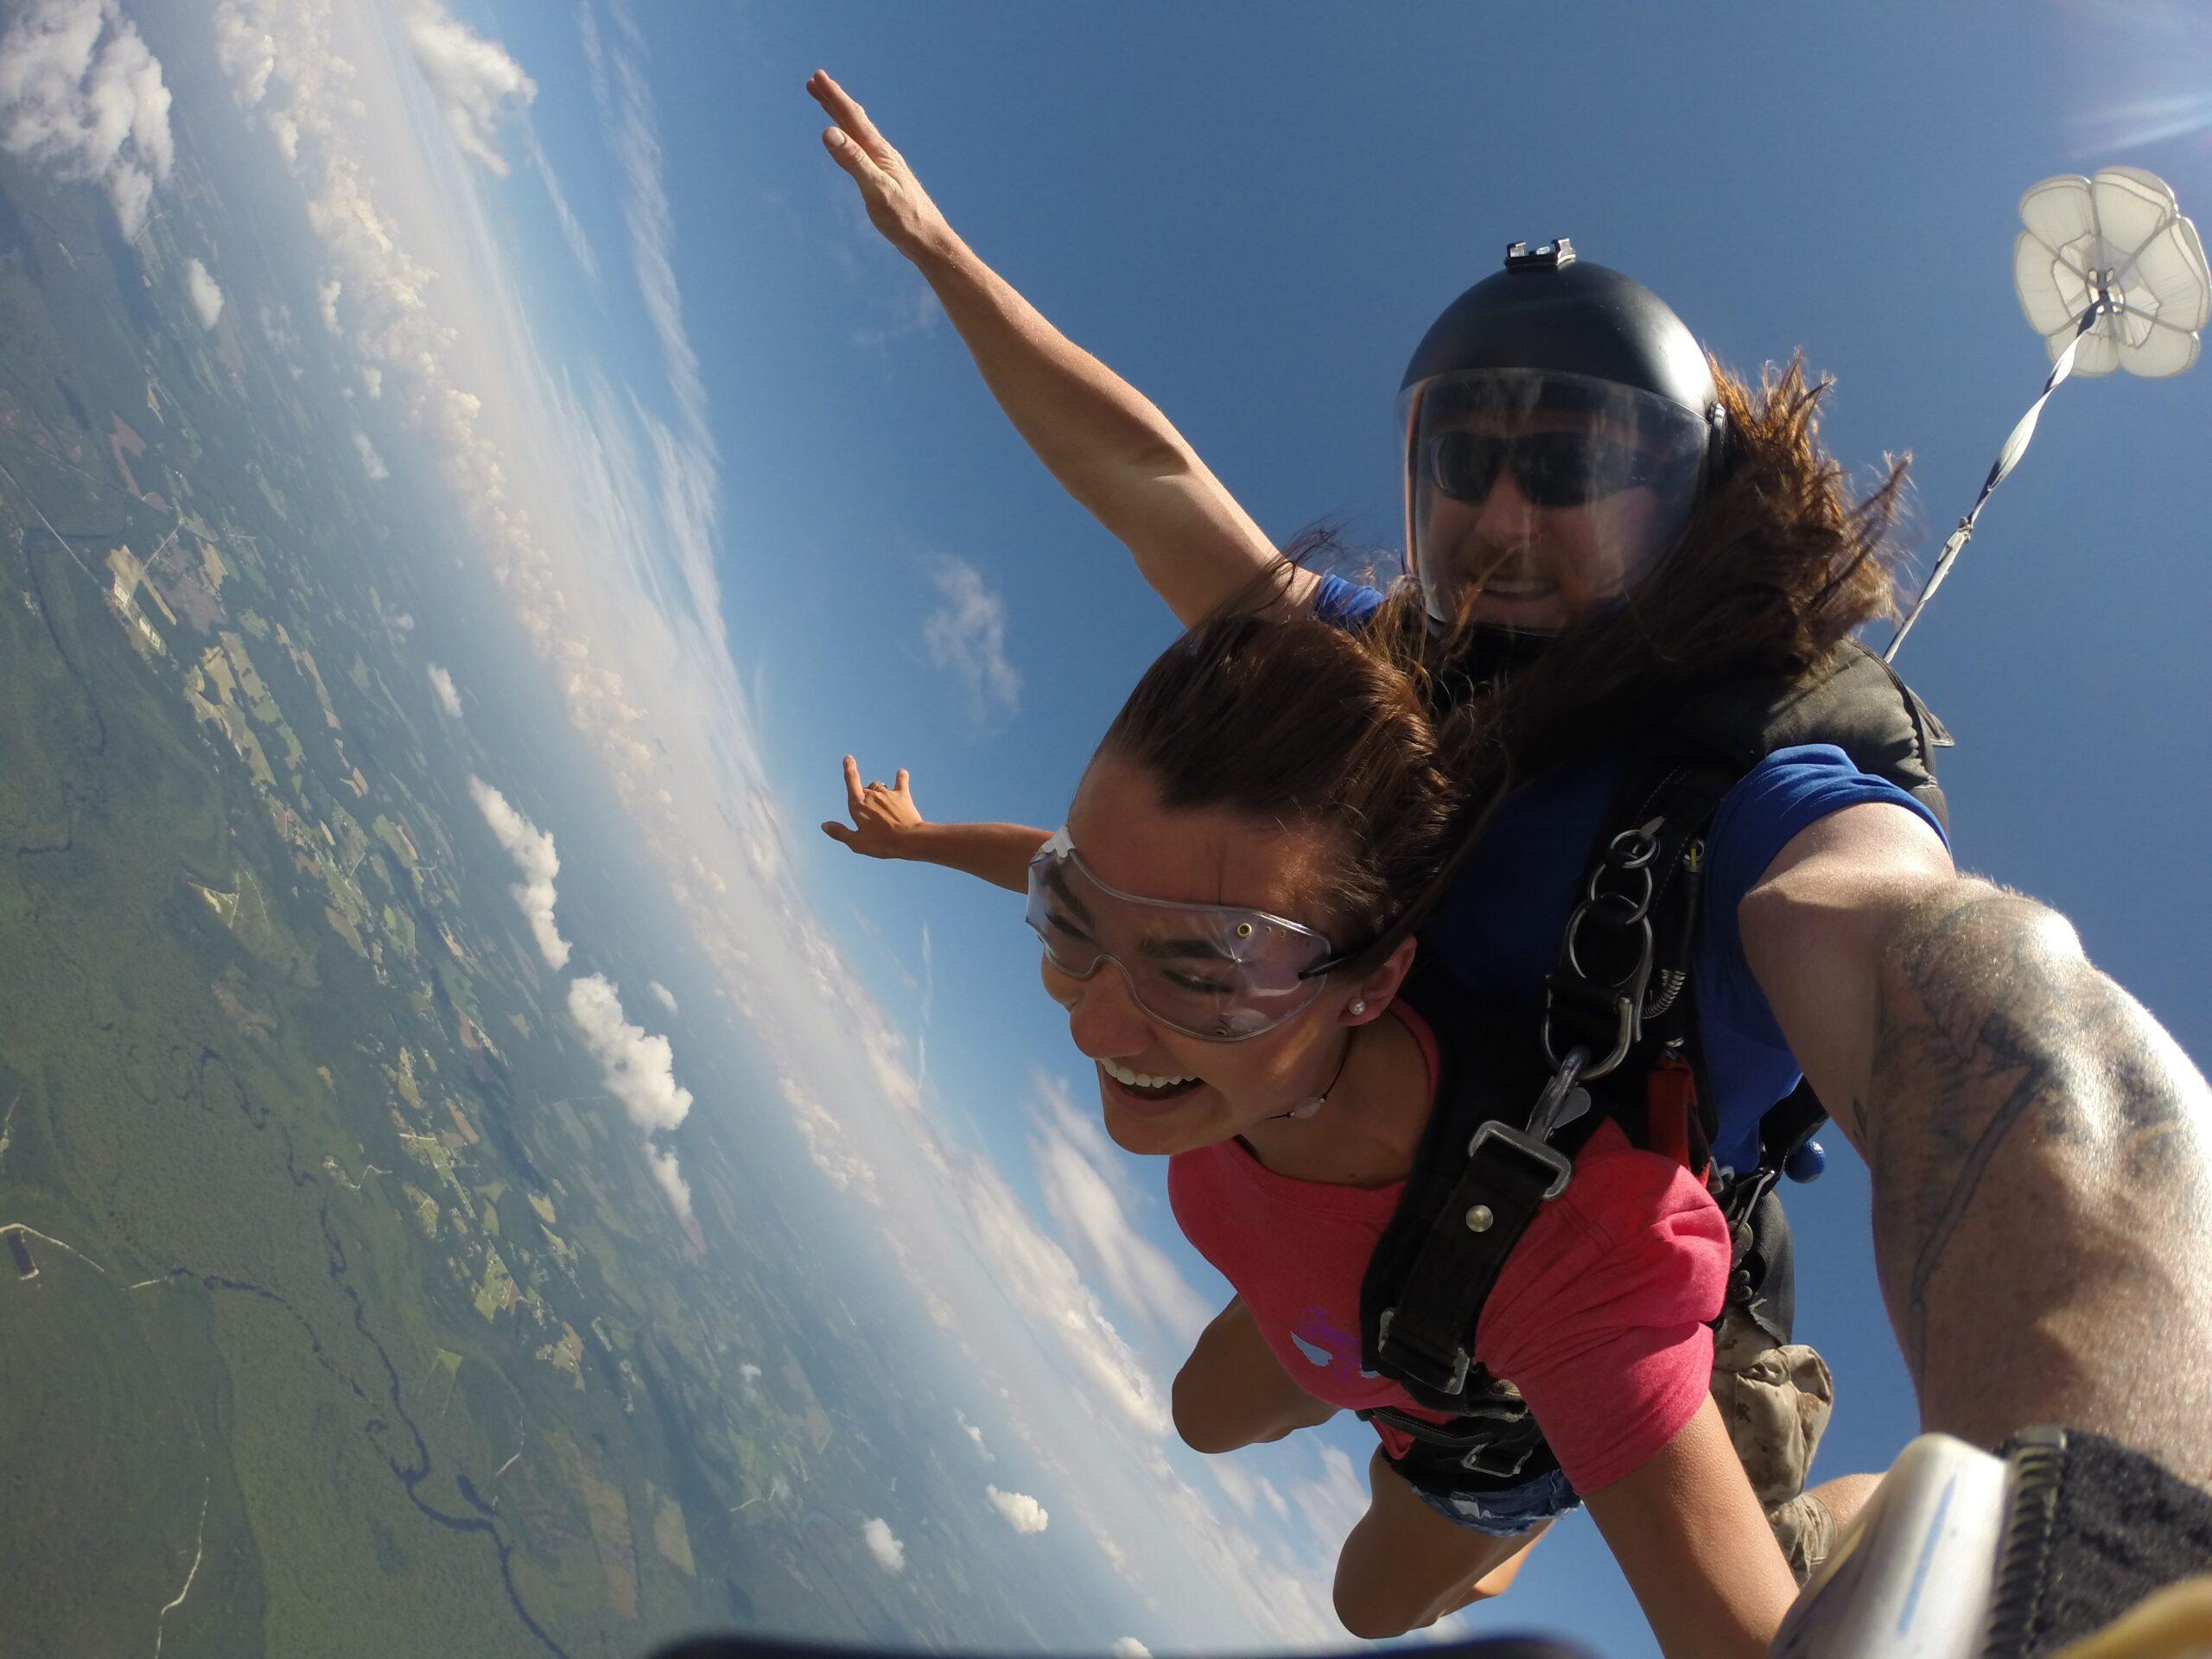 How SkyDiving Changed My Life